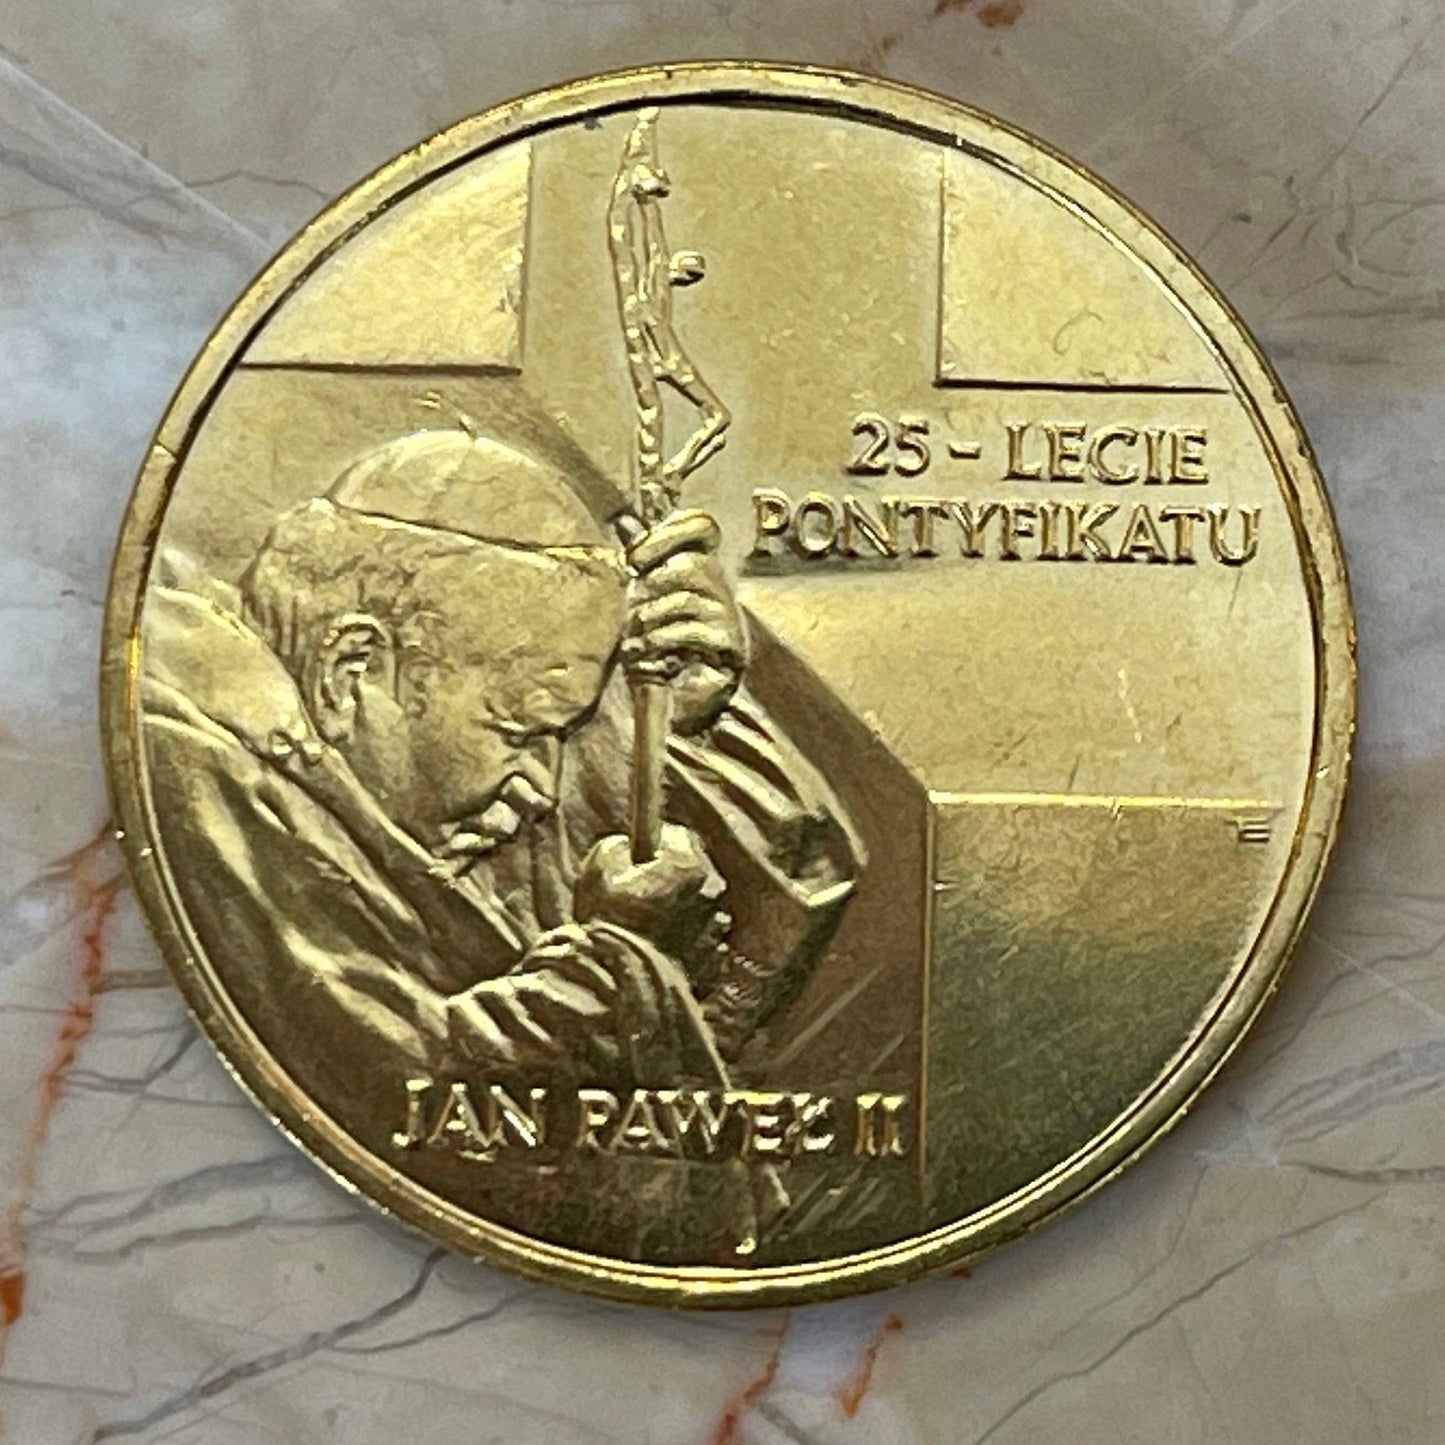 Pope John Paul II 25th Anniversary Poland 2 Zlote Authentic Coin Money for Jewelry and Craft Making